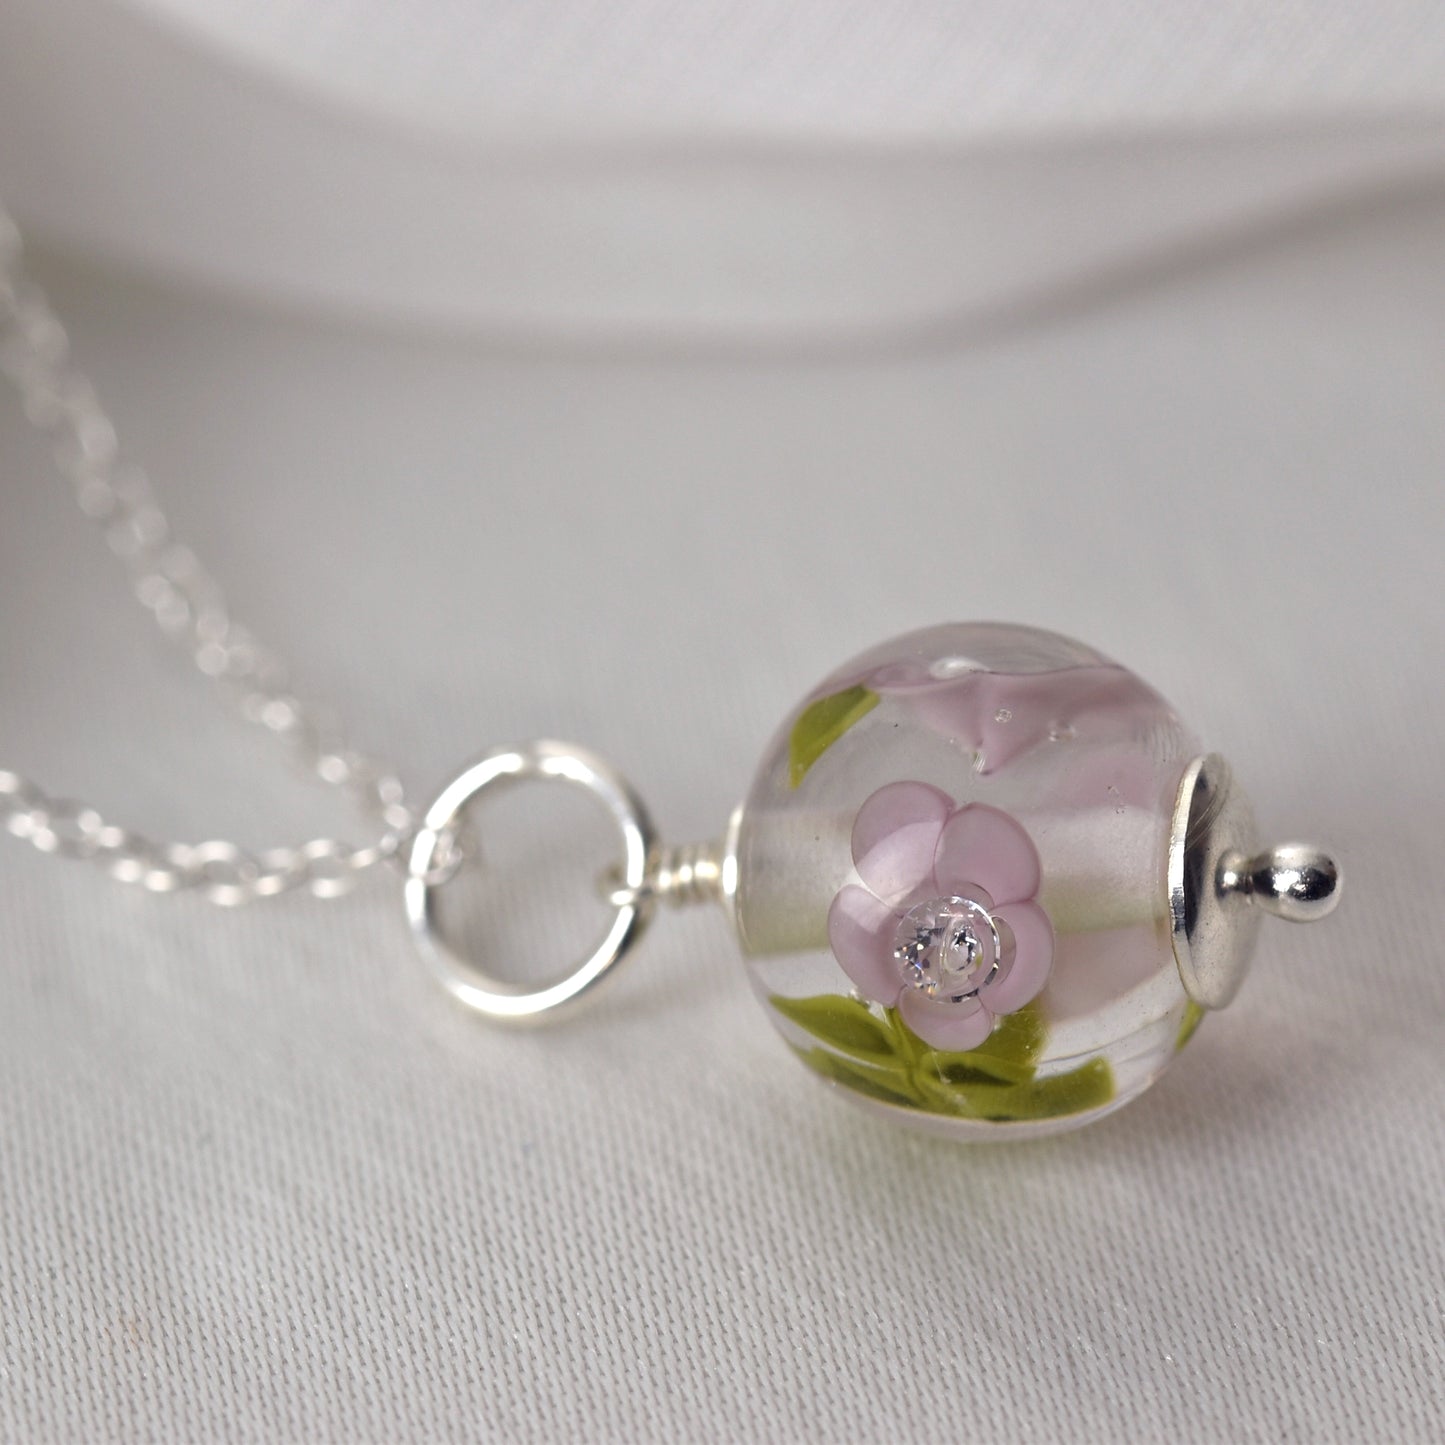 Necklace with lilac glass flowers